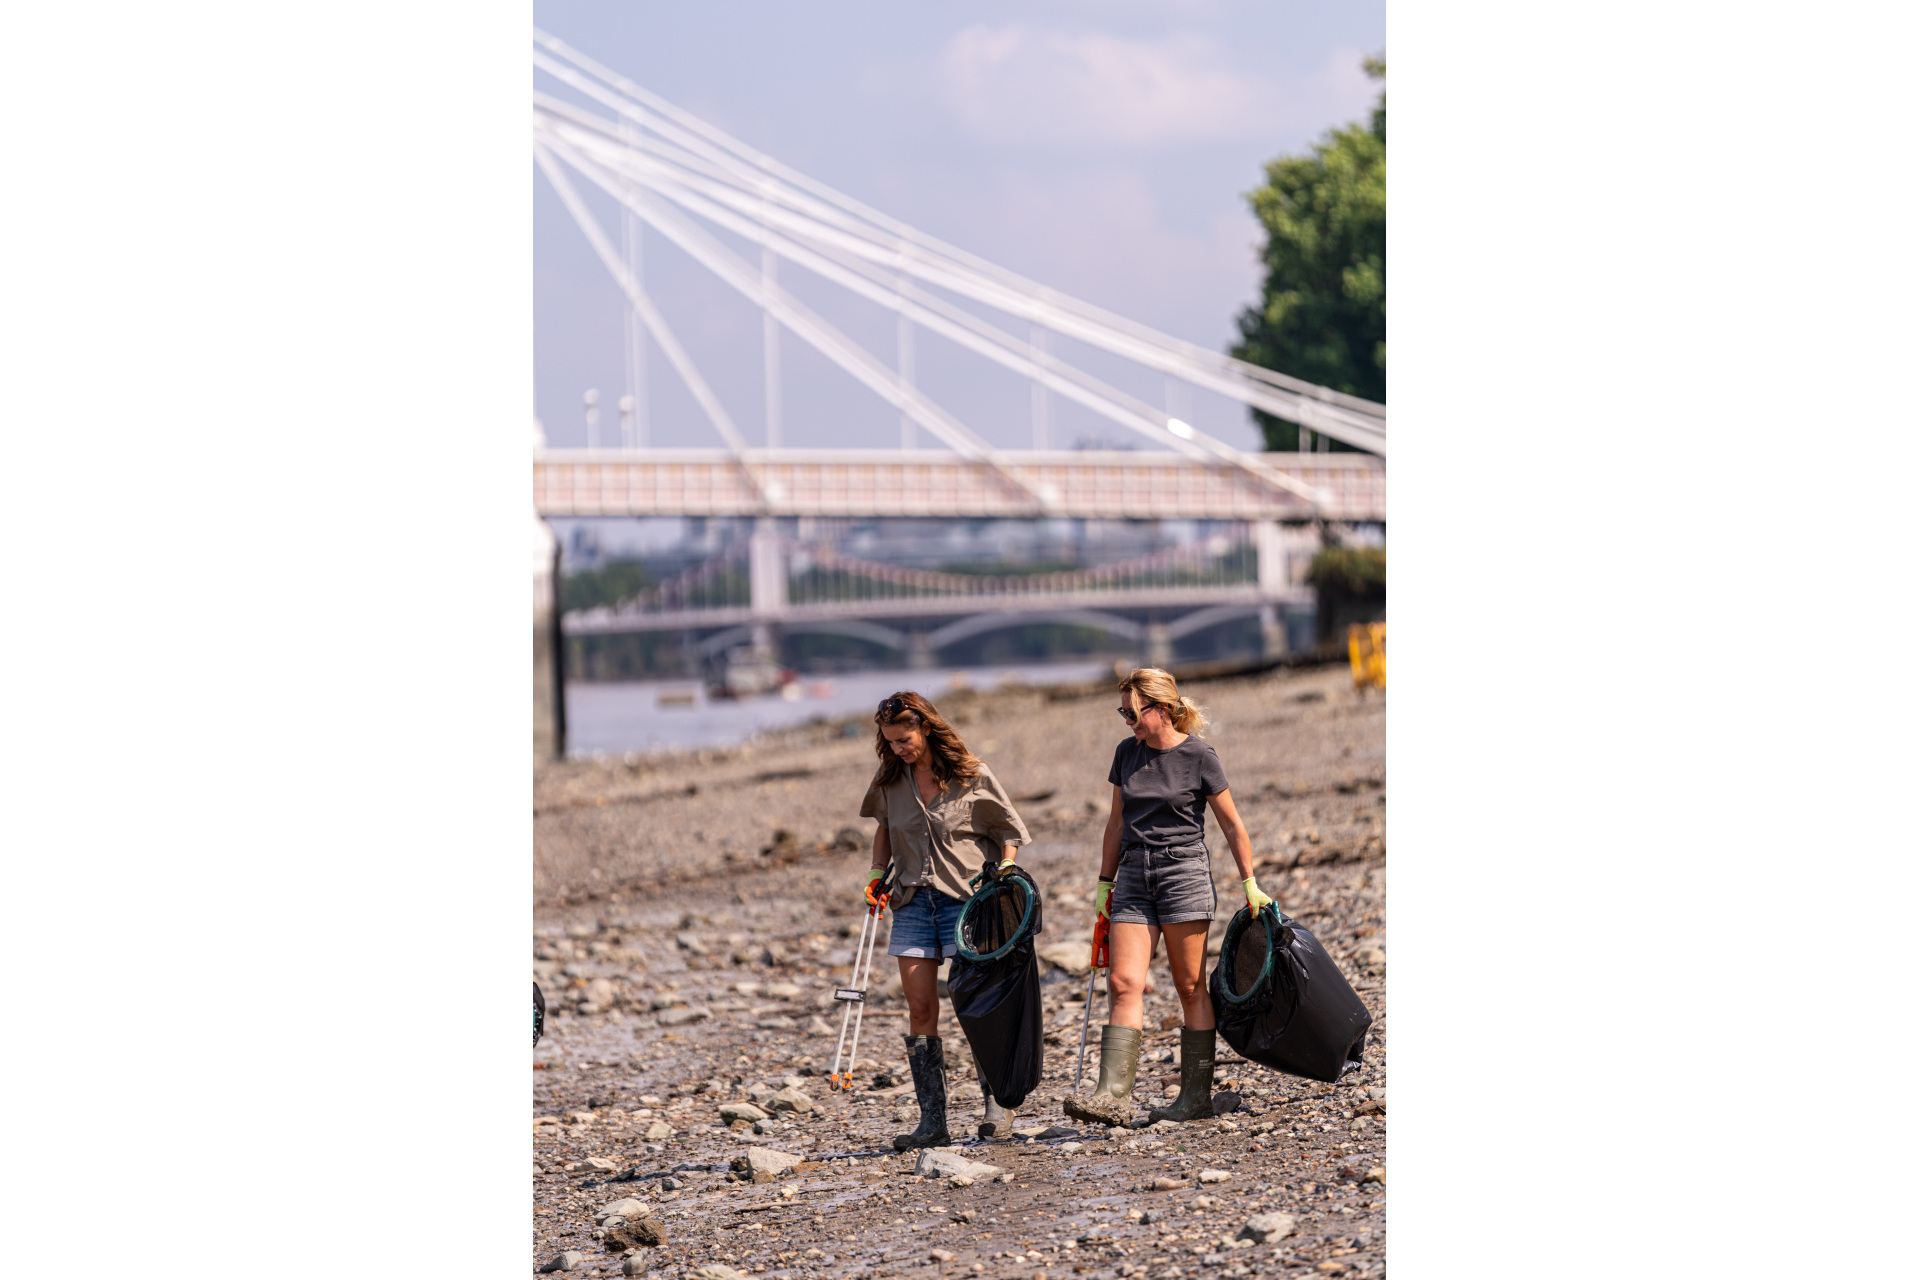 People picking up litter on the river banks of the Thames